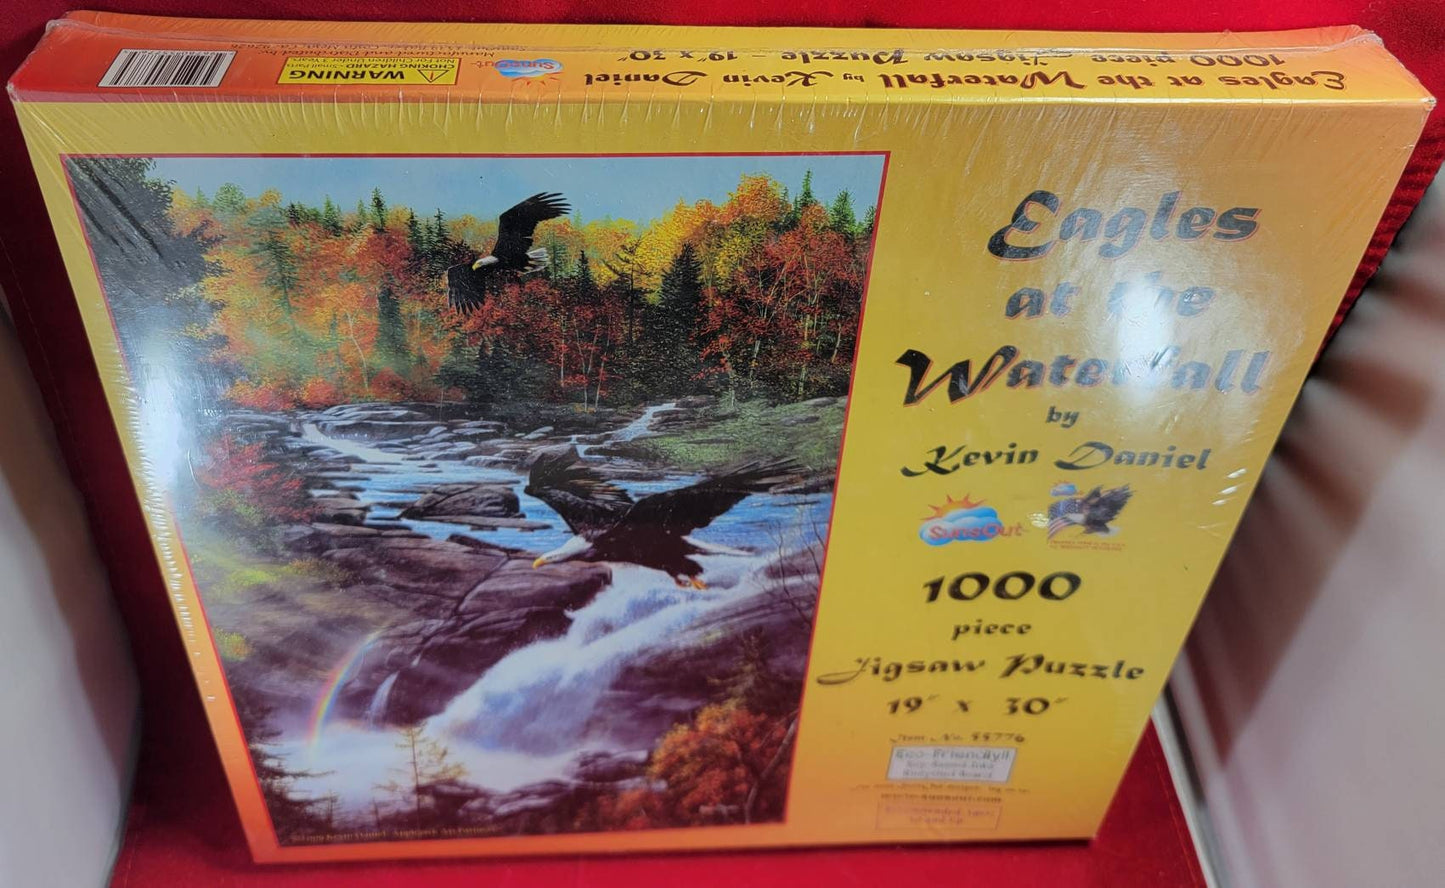 Eagles at the waterfall 1000 piece jigsaw puzzle (nib)